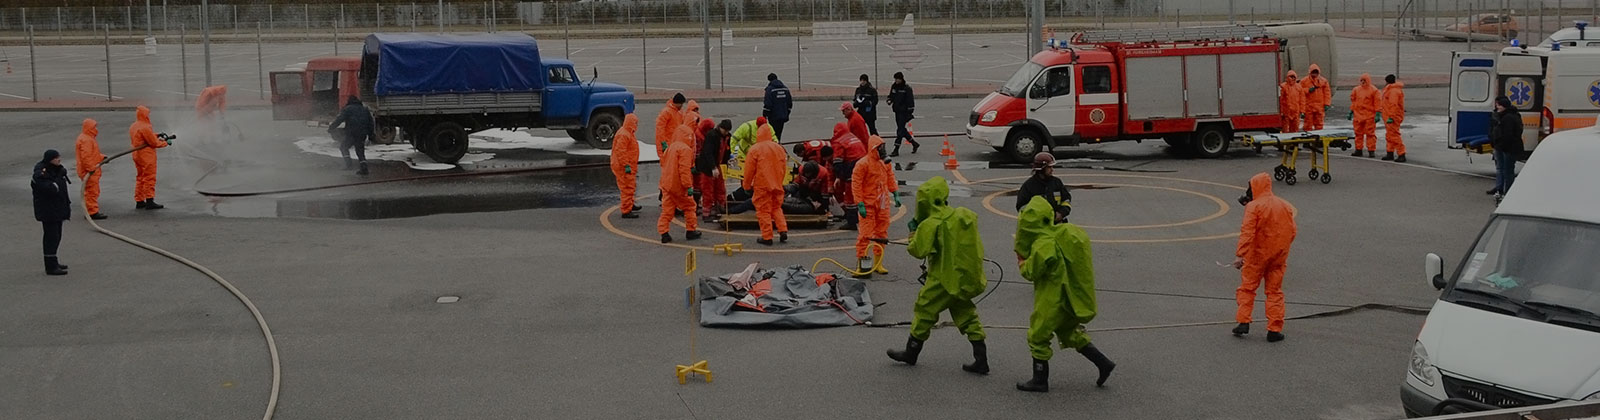 various individuals in hazmat suits performing training exercises outside with fire trucks and ambulances